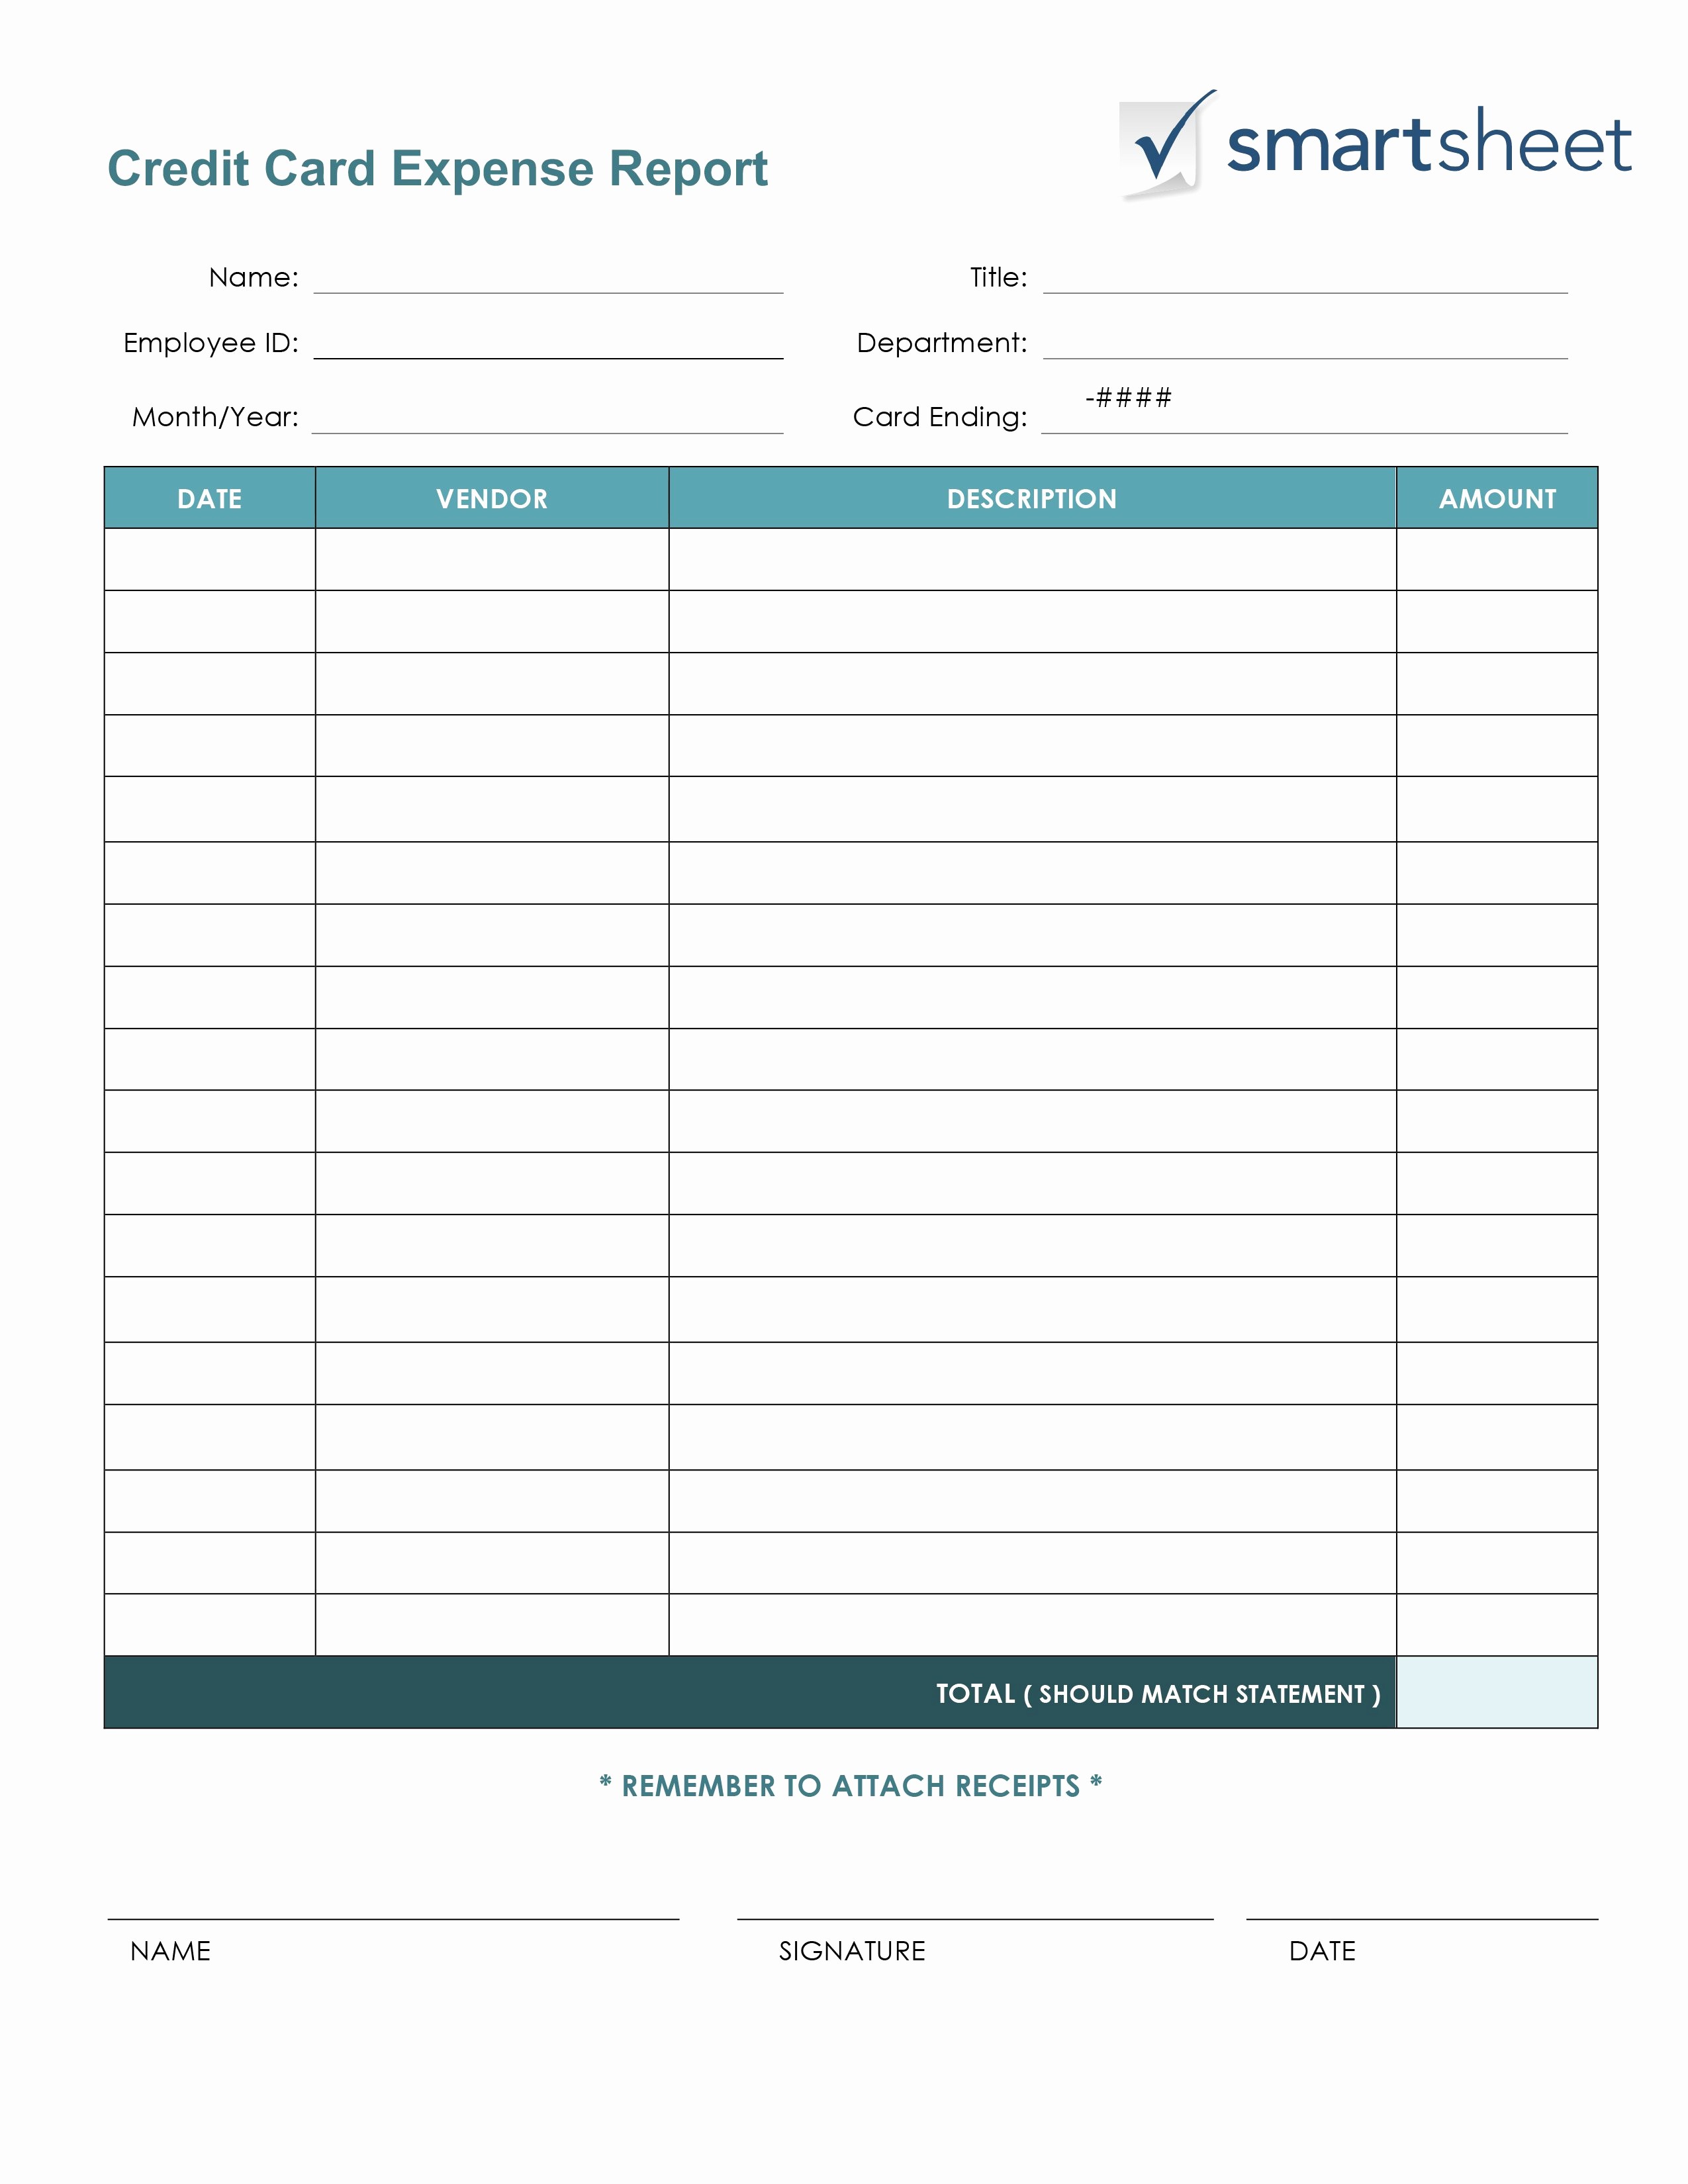 Free Printable Expense Report forms Beautiful Free Expense Report Templates Smartsheet